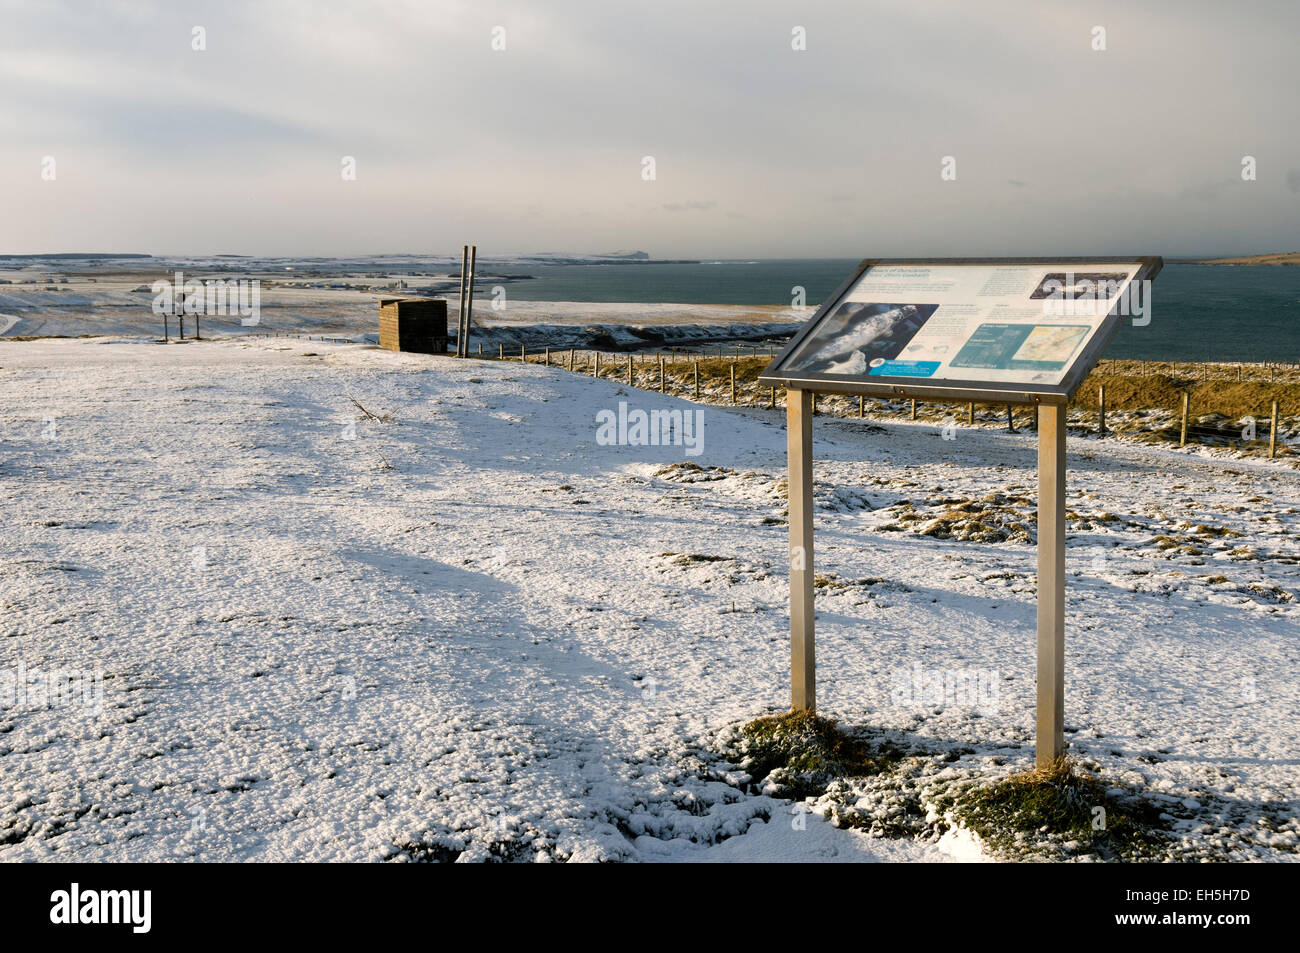 Information sign at Duncansby Head, near John o'Groats, Caithness, Scotland, UK Looking towards Dunnet Head in the distance. Stock Photo